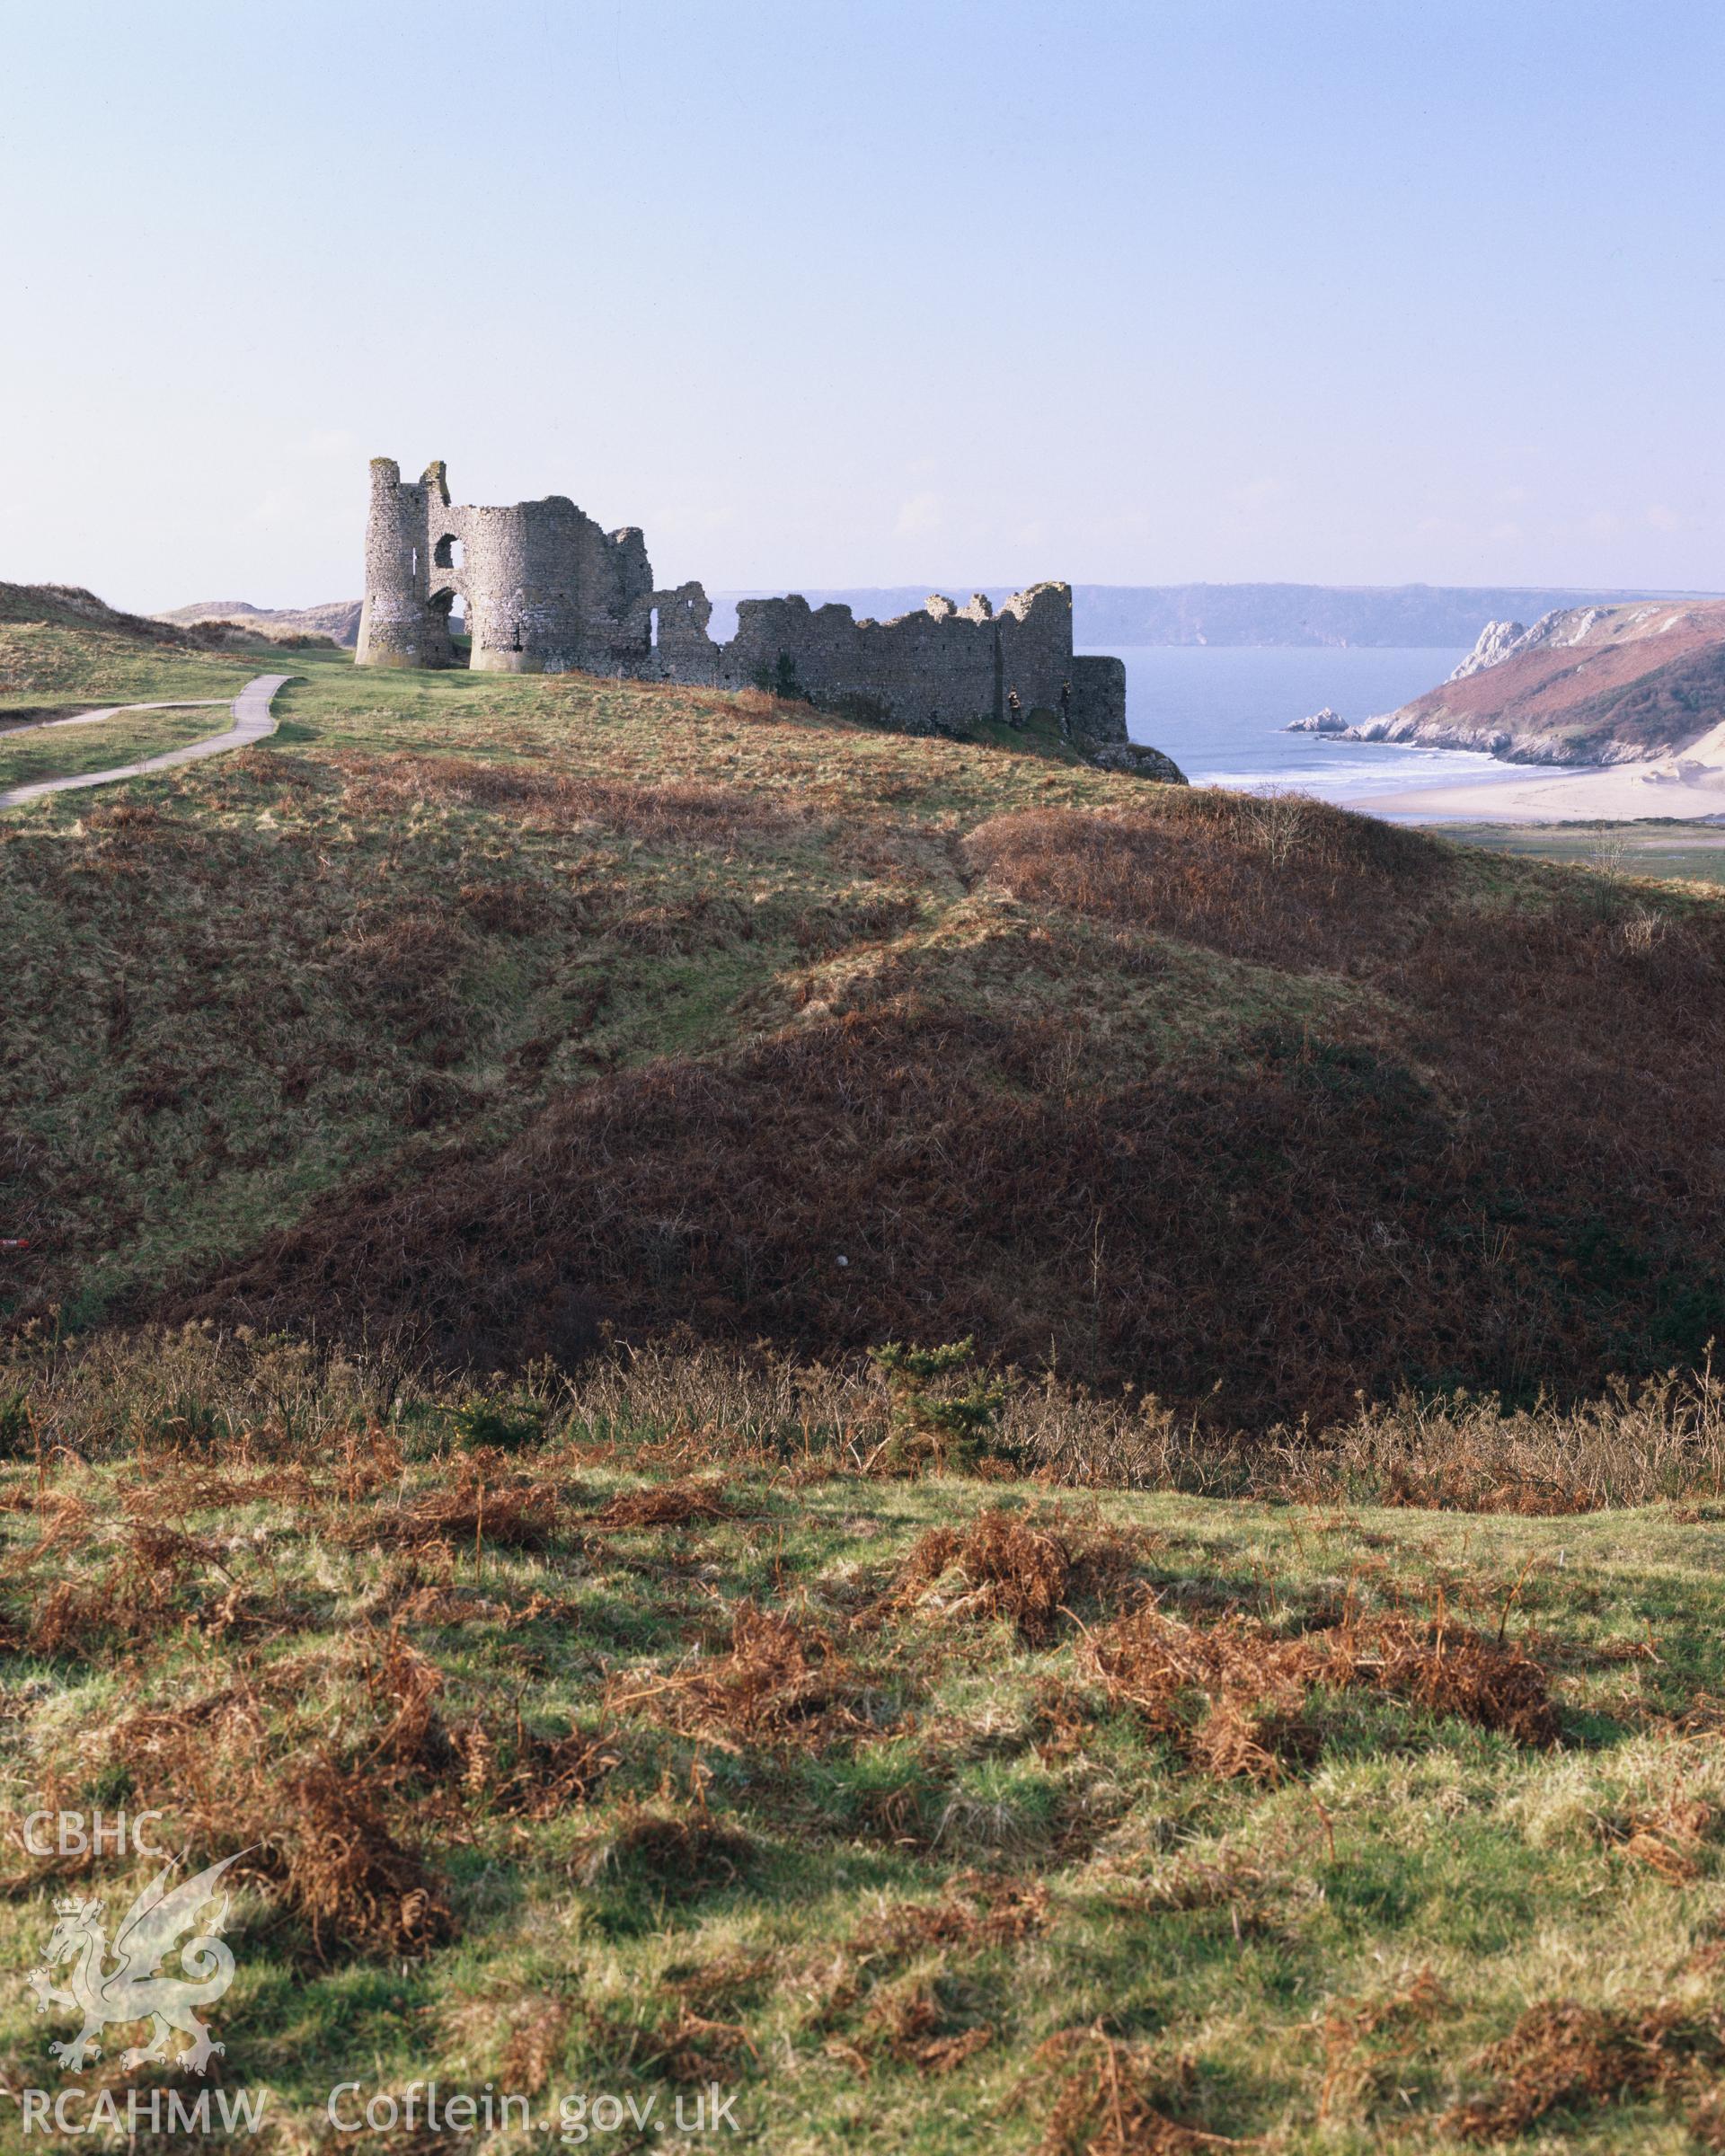 RCAHMW colour transparency showing view of Pennard Castle, taken by Iain Wright, c.1991